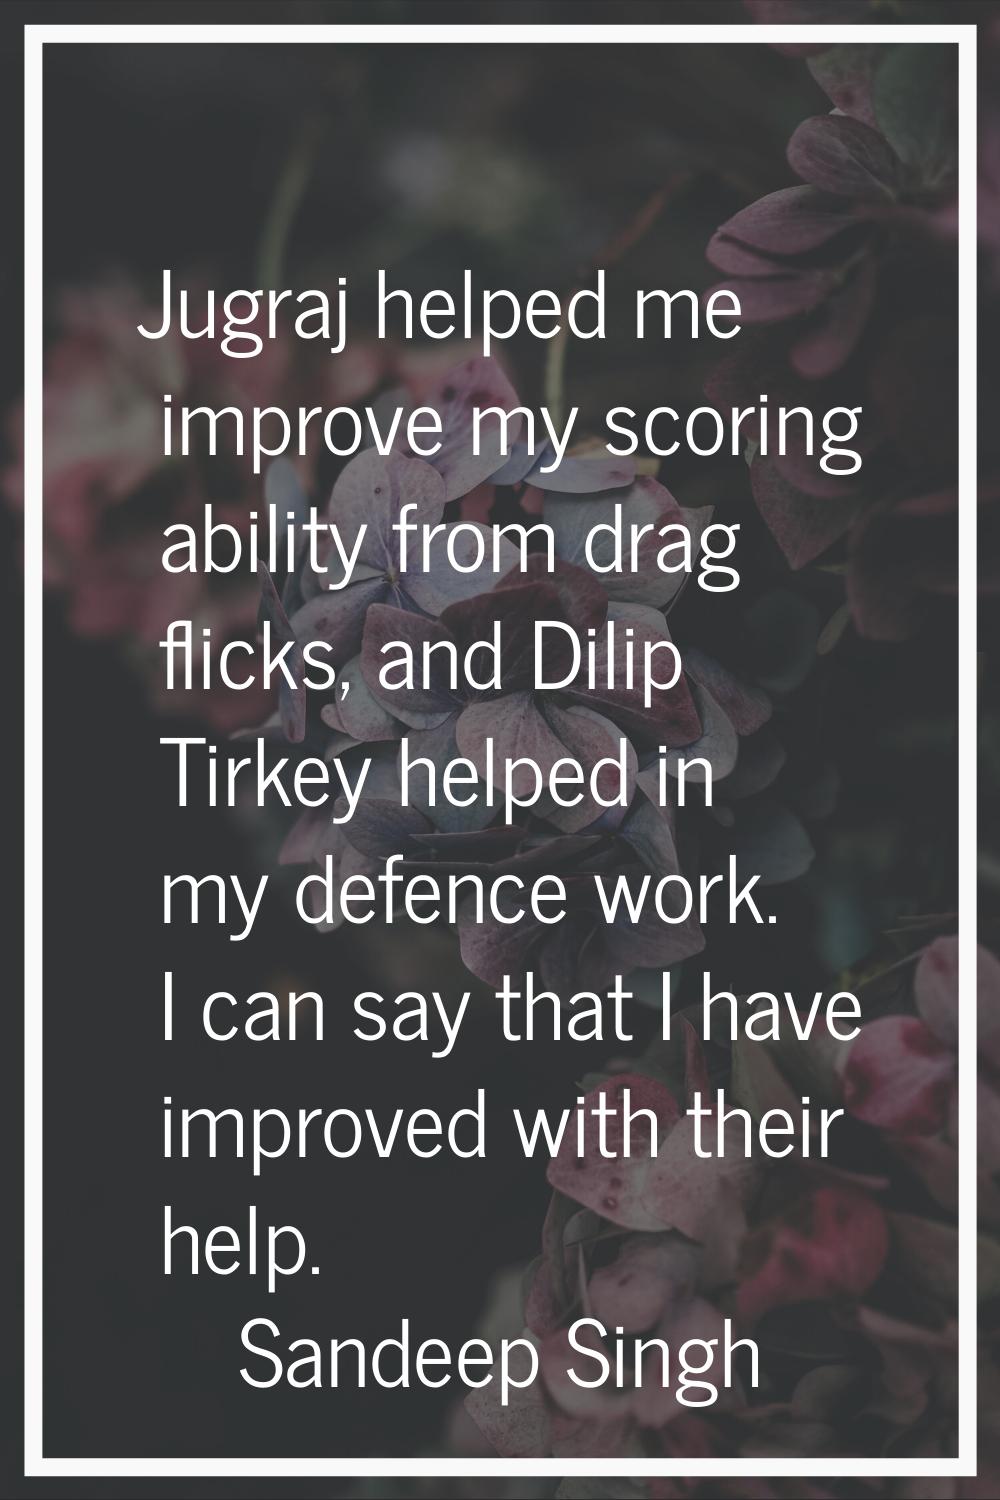 Jugraj helped me improve my scoring ability from drag flicks, and Dilip Tirkey helped in my defence